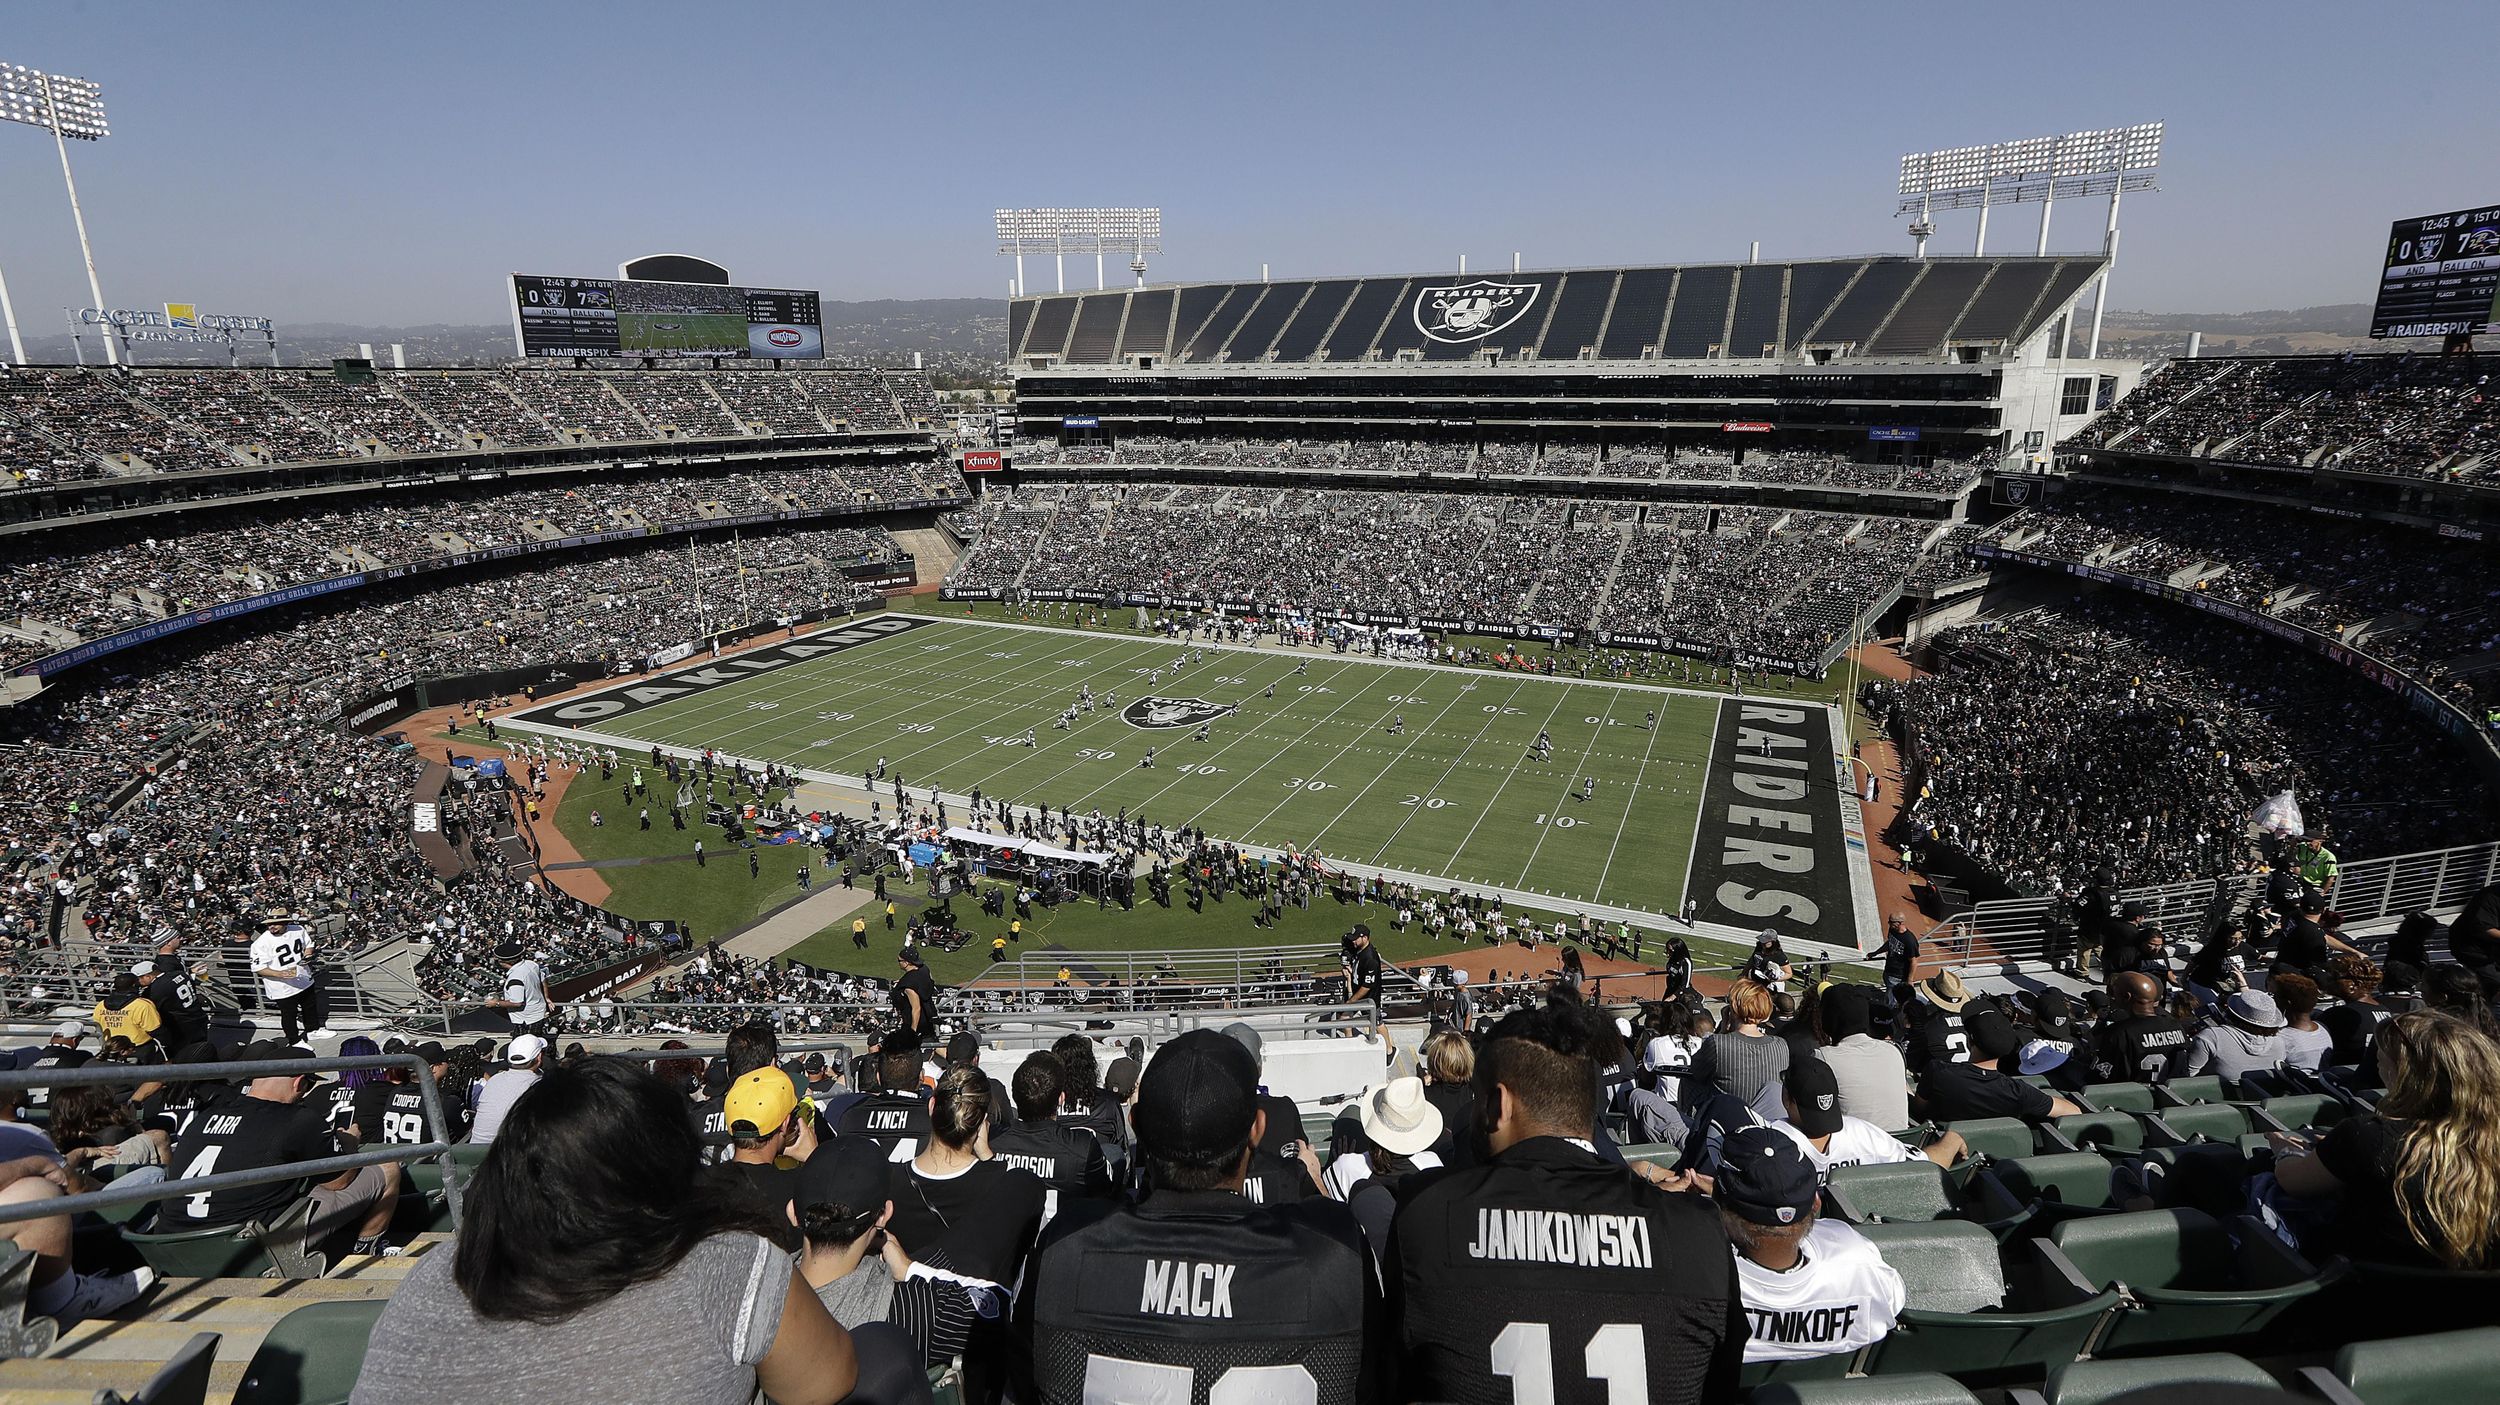 ASPURIA: Oakland is where the Raiders truly belong – Times-Standard